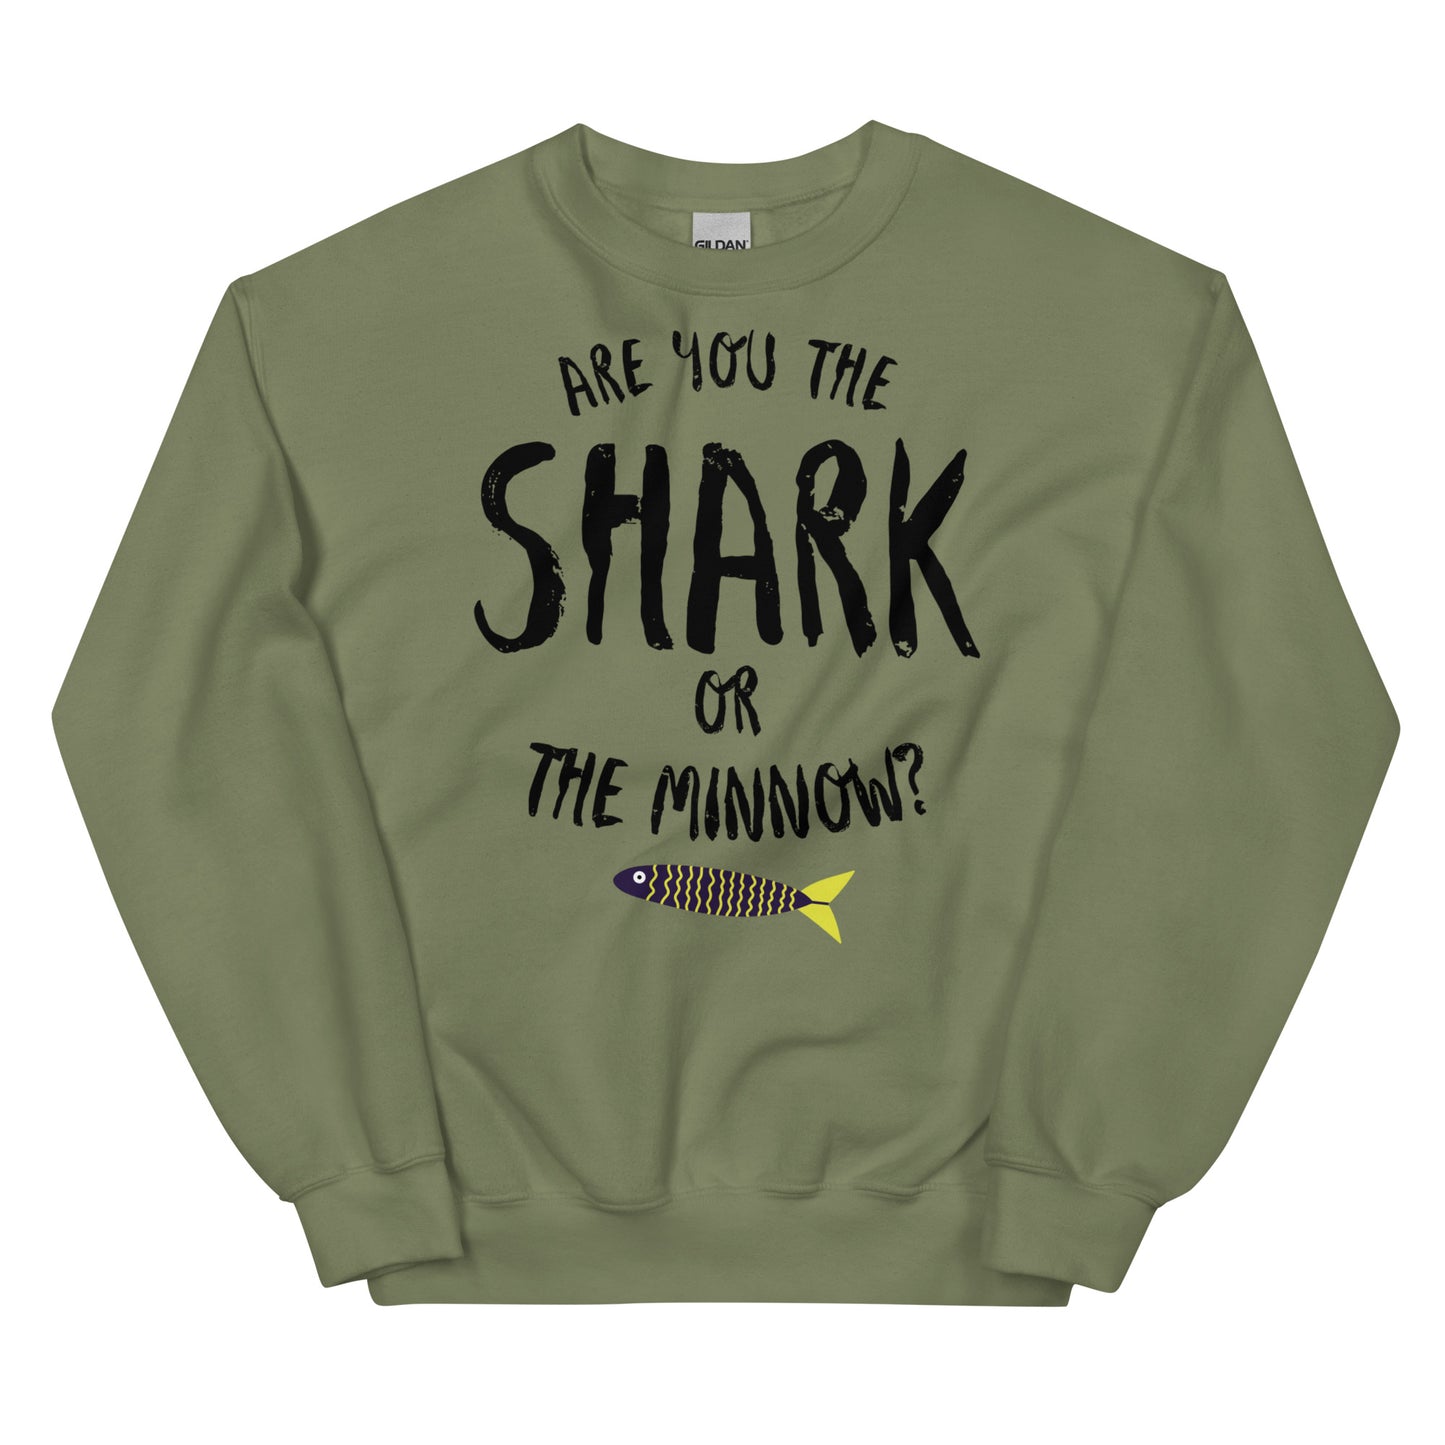 Are you the SHARK or the minnow? Unisex Crew Neck Sweatshirt (black lettering)